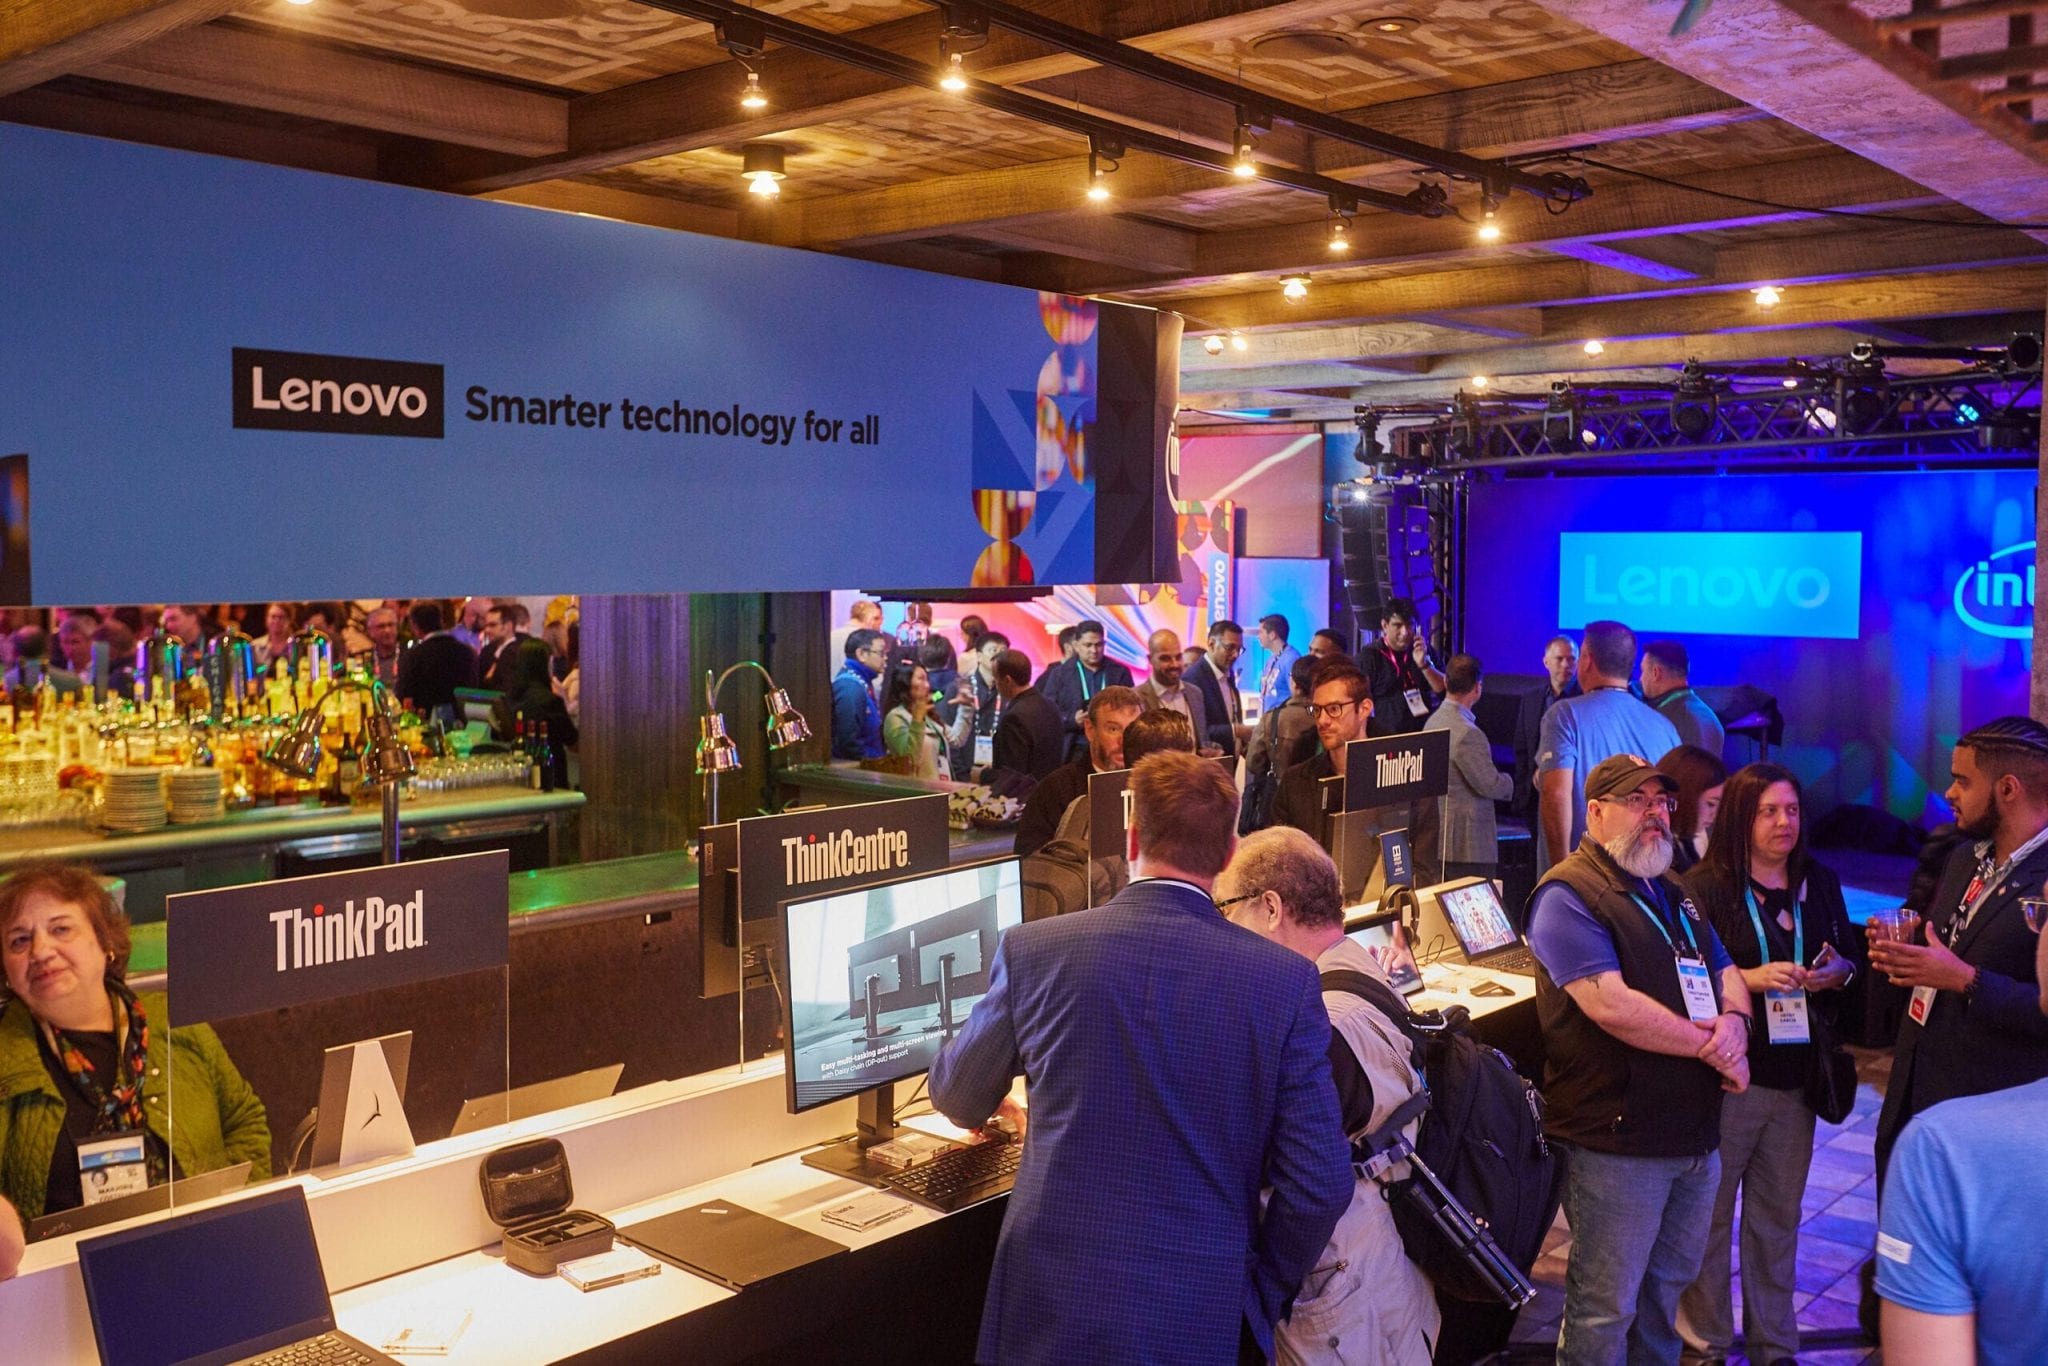 Lenovo booth at CES 2020